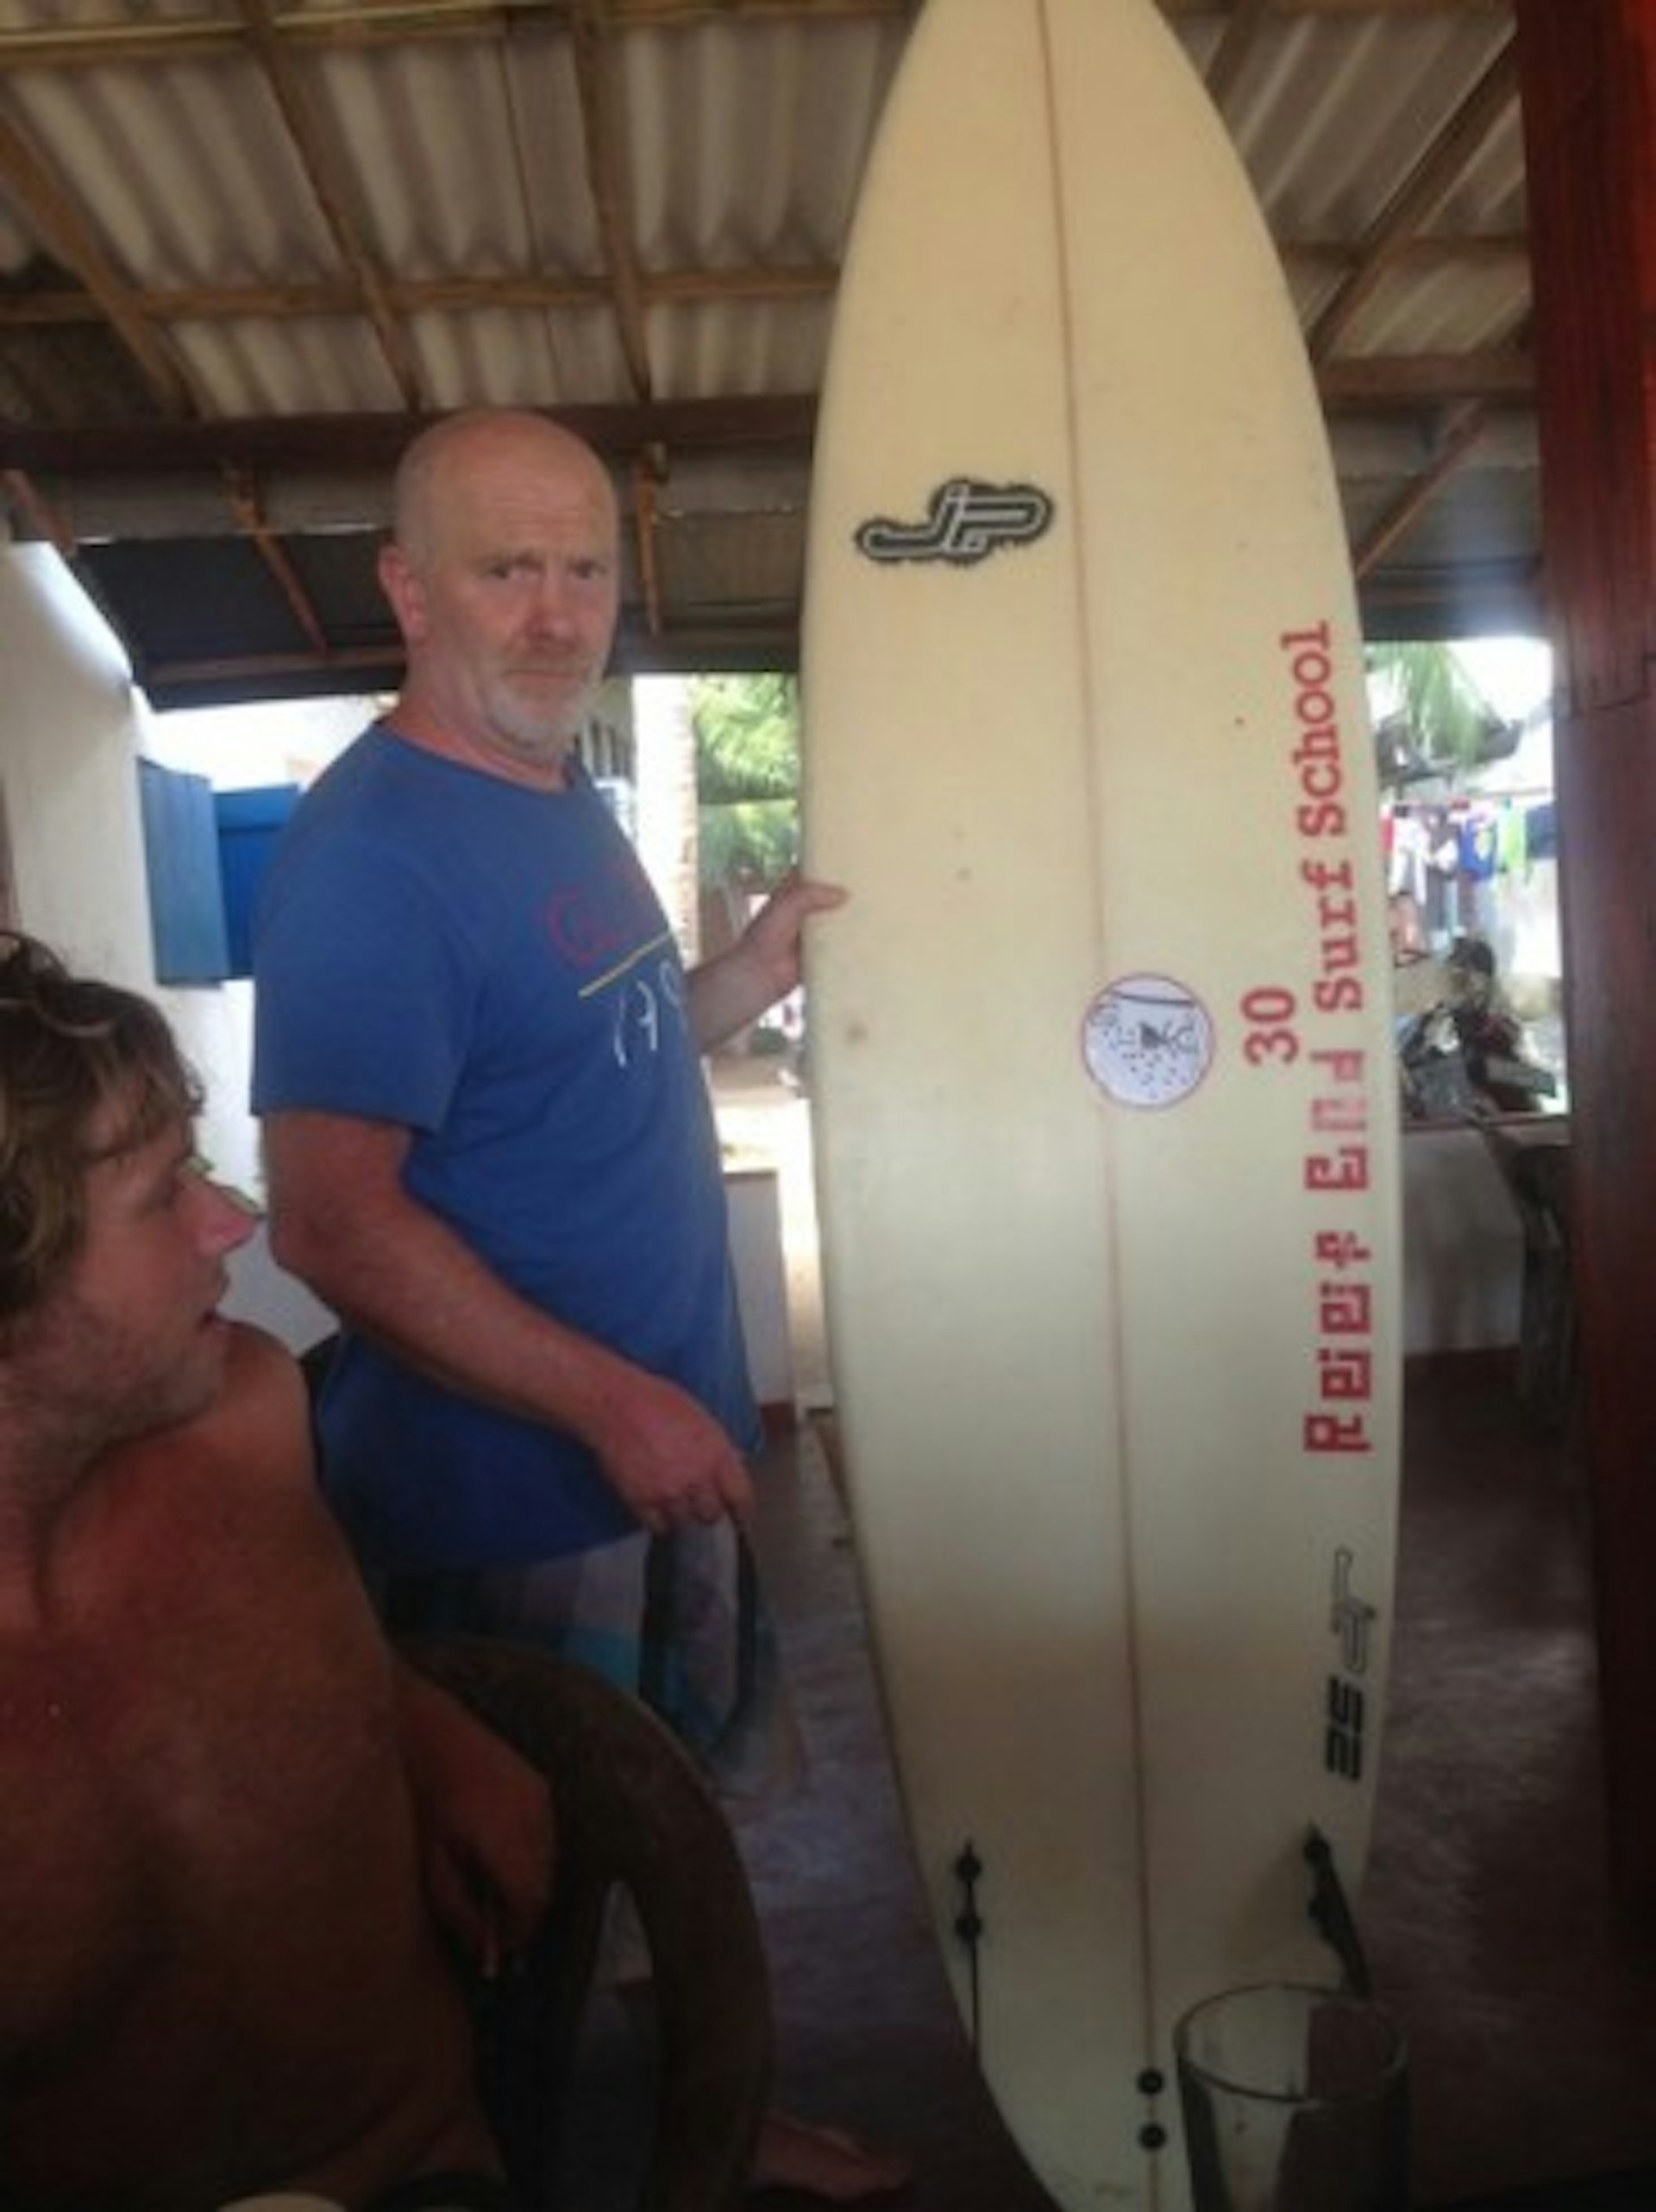 Shaper JP and the lost and found board